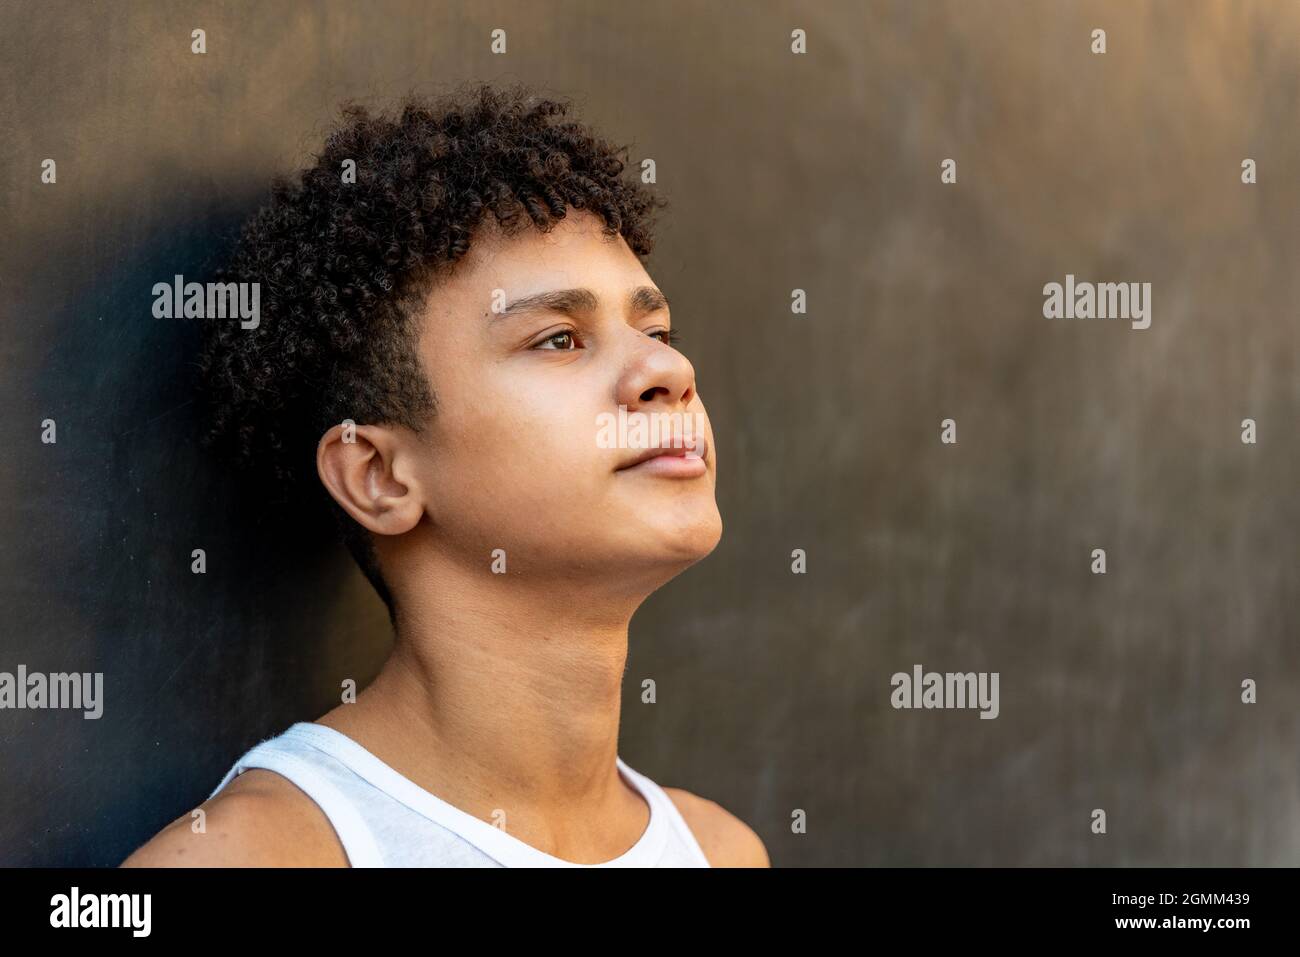 Afro latin male teenager against a wall, looking up. Stock Photo